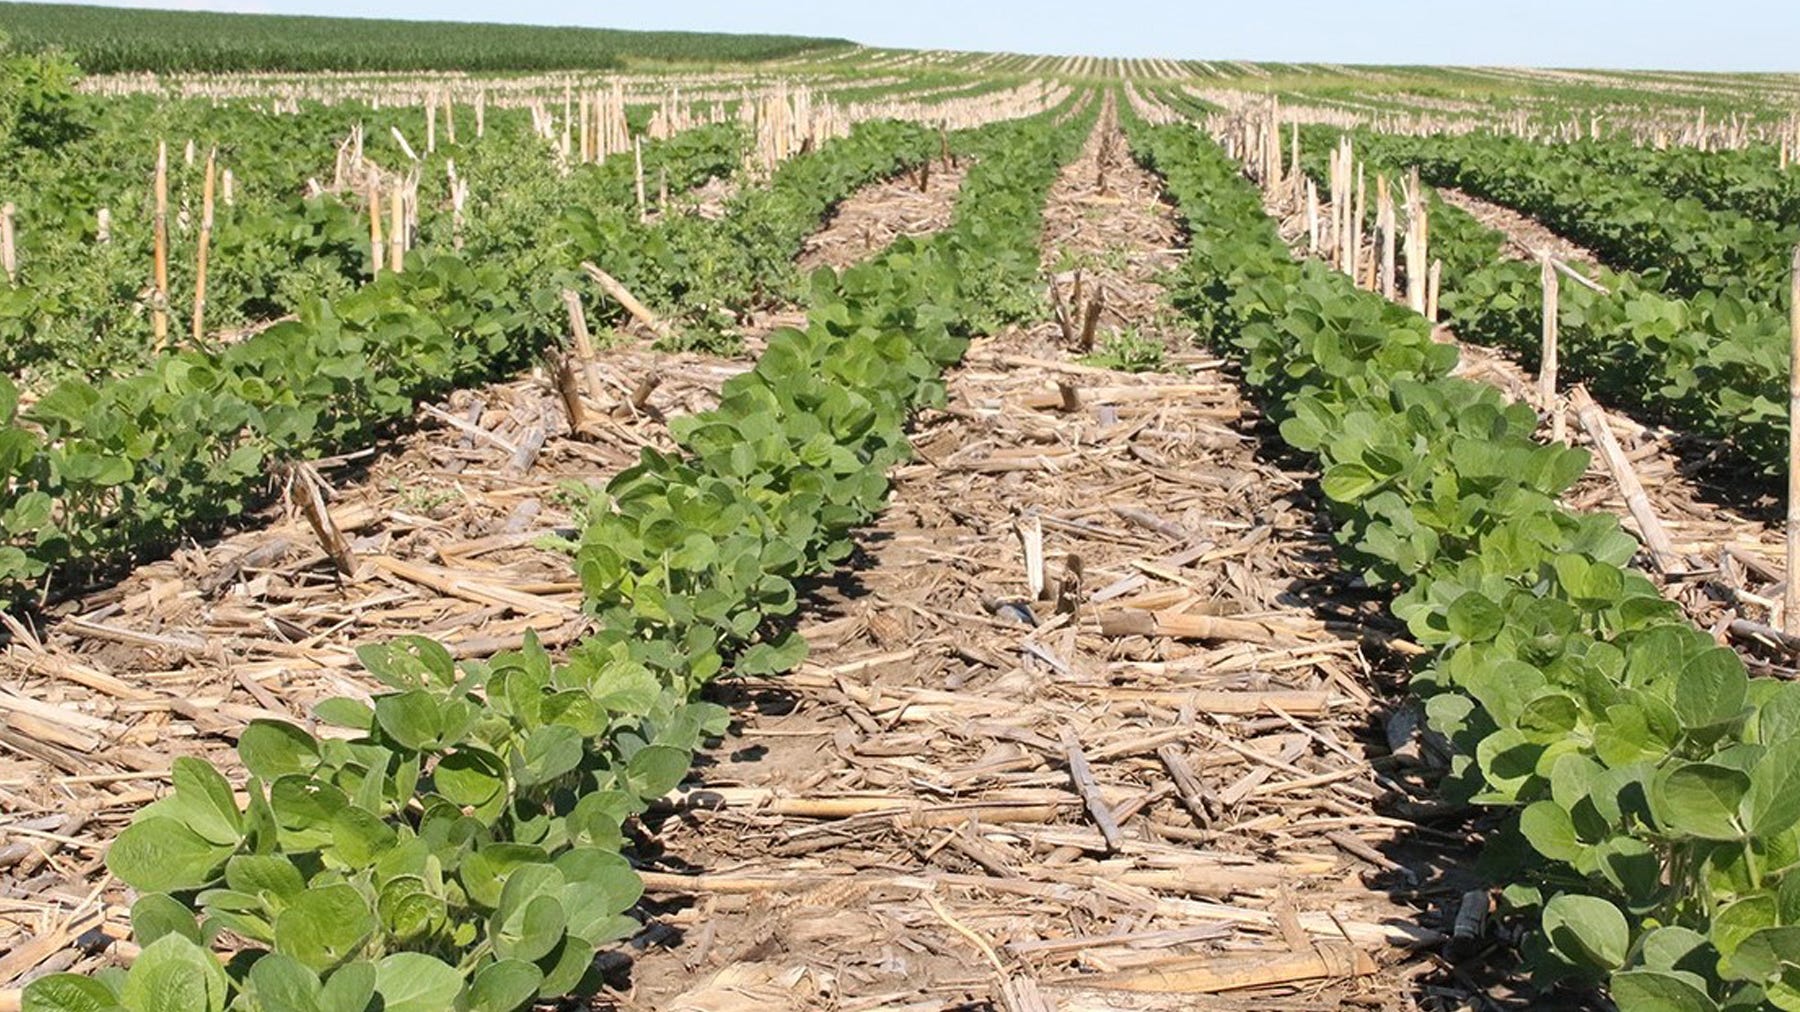 Rows of soybeans planted in no-till cornfield